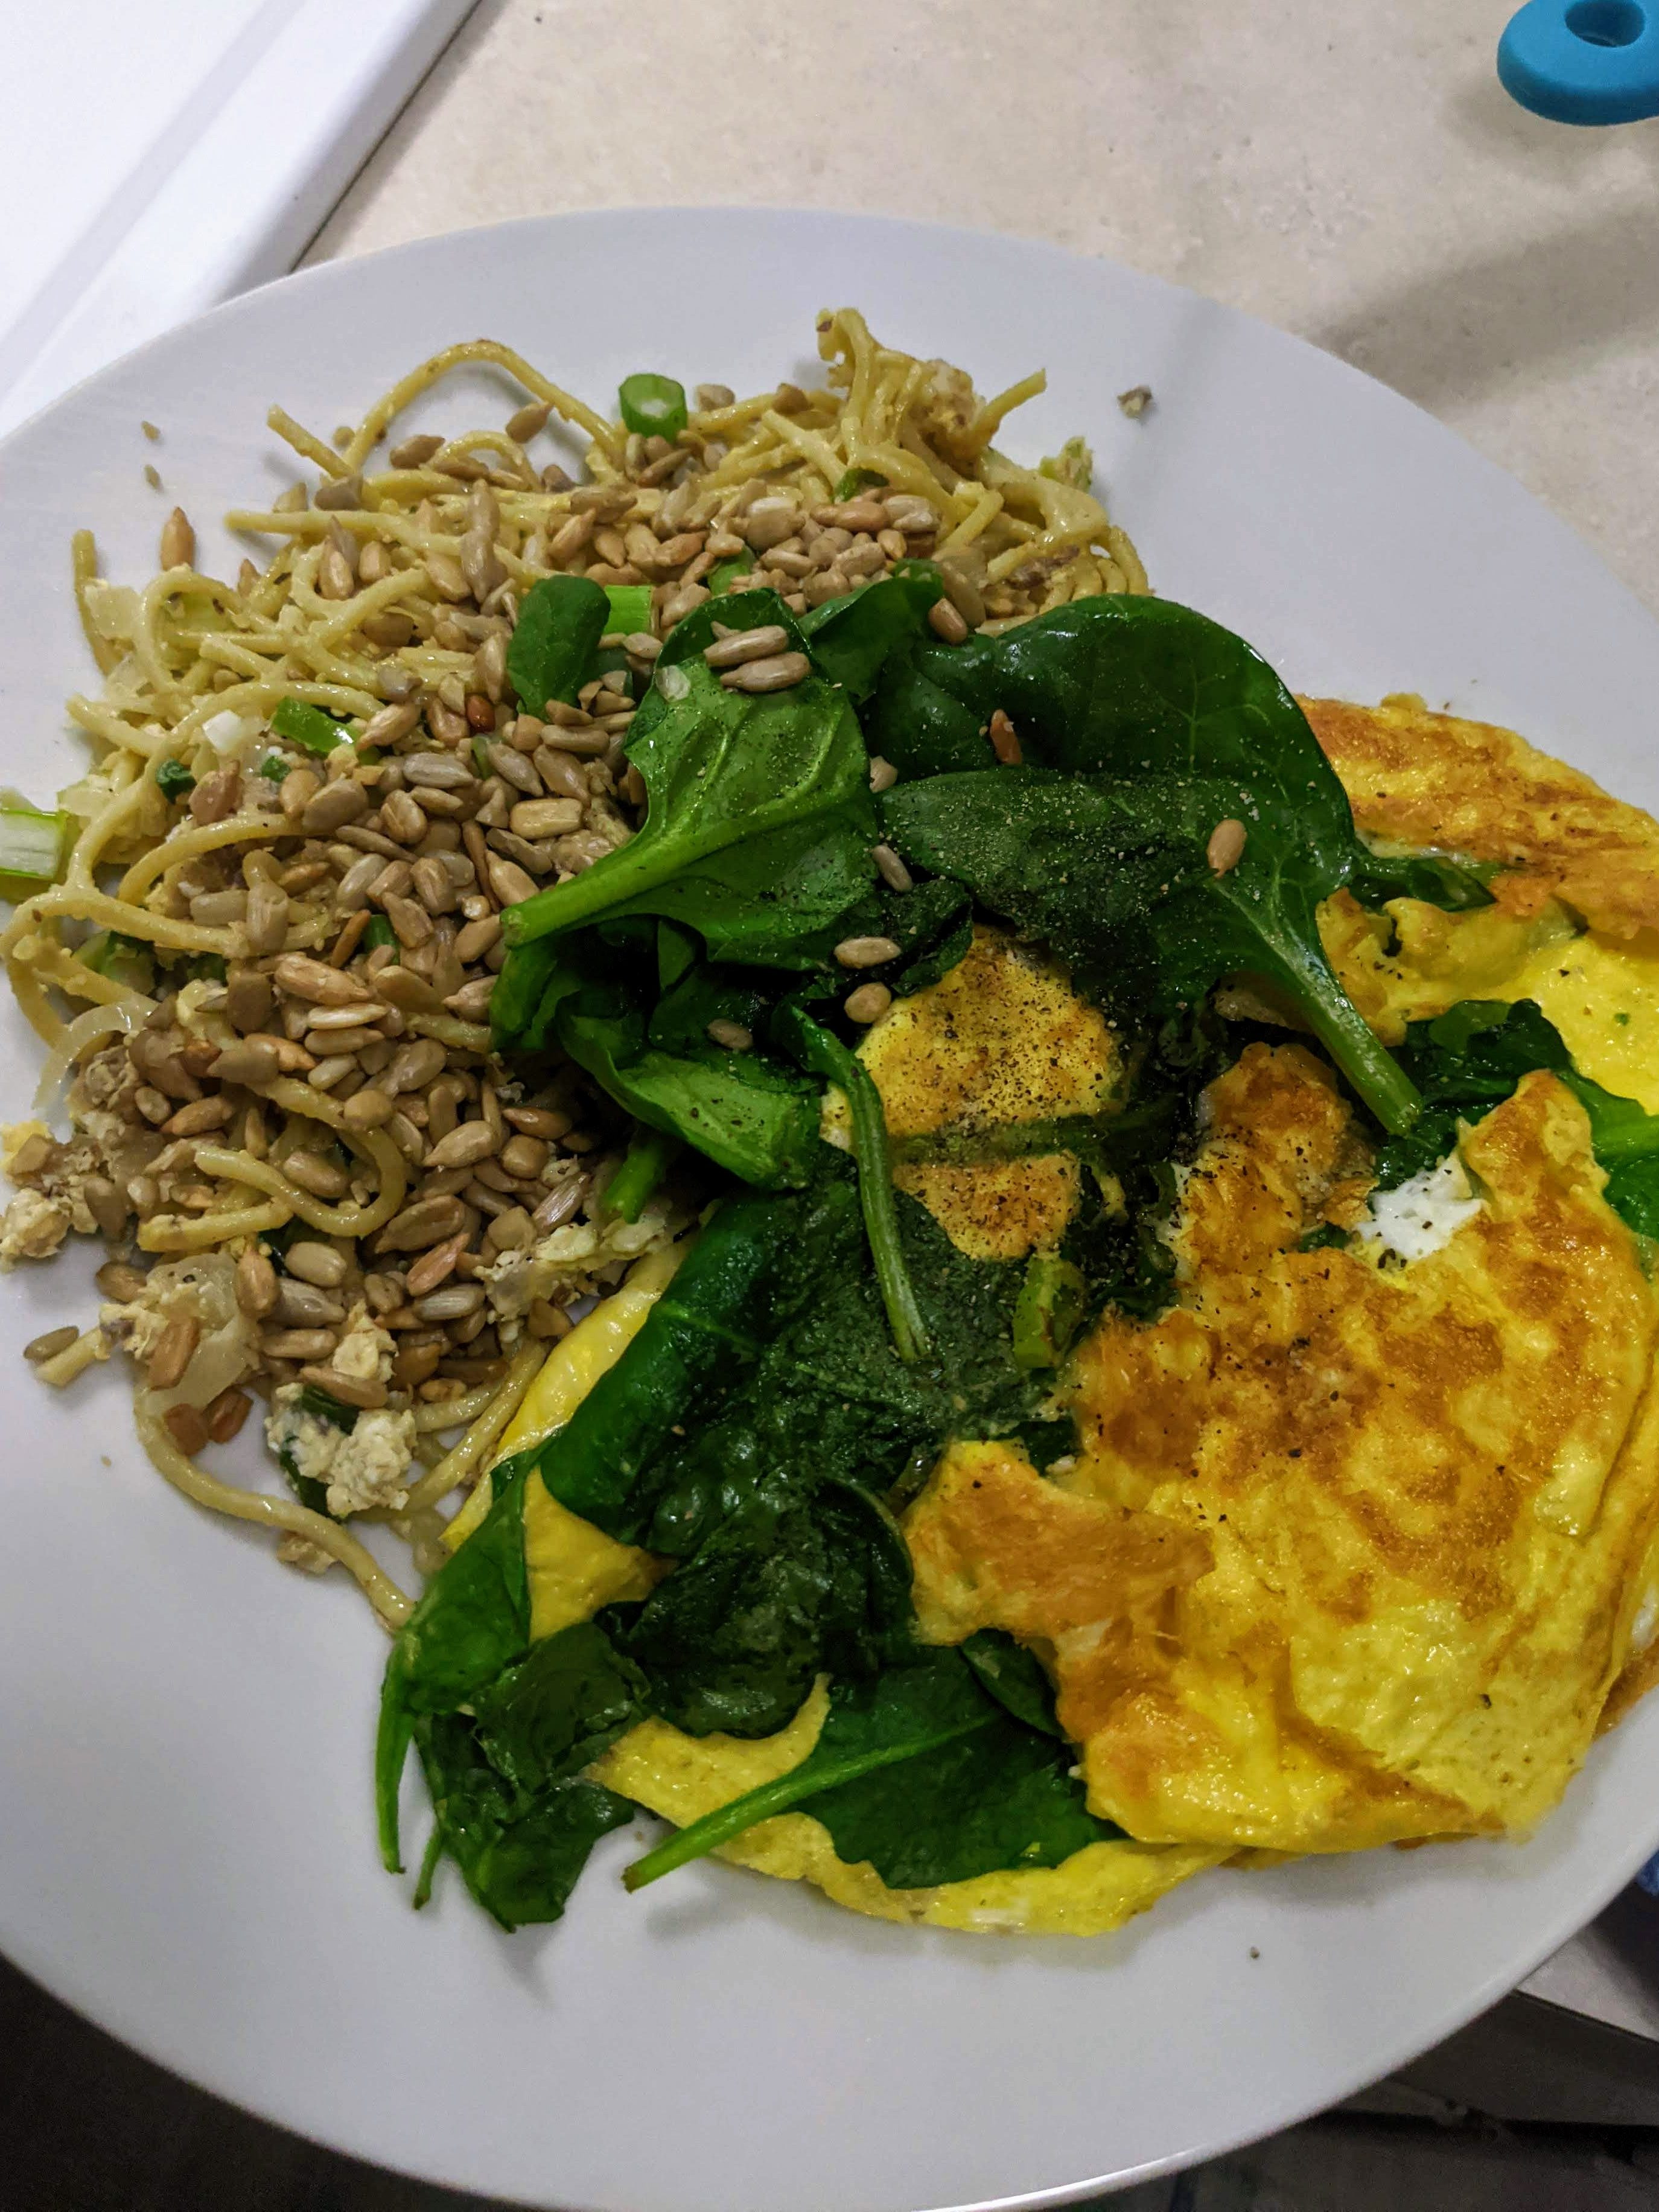 Veggie pasta with seeds plus spinach and cheese omelet